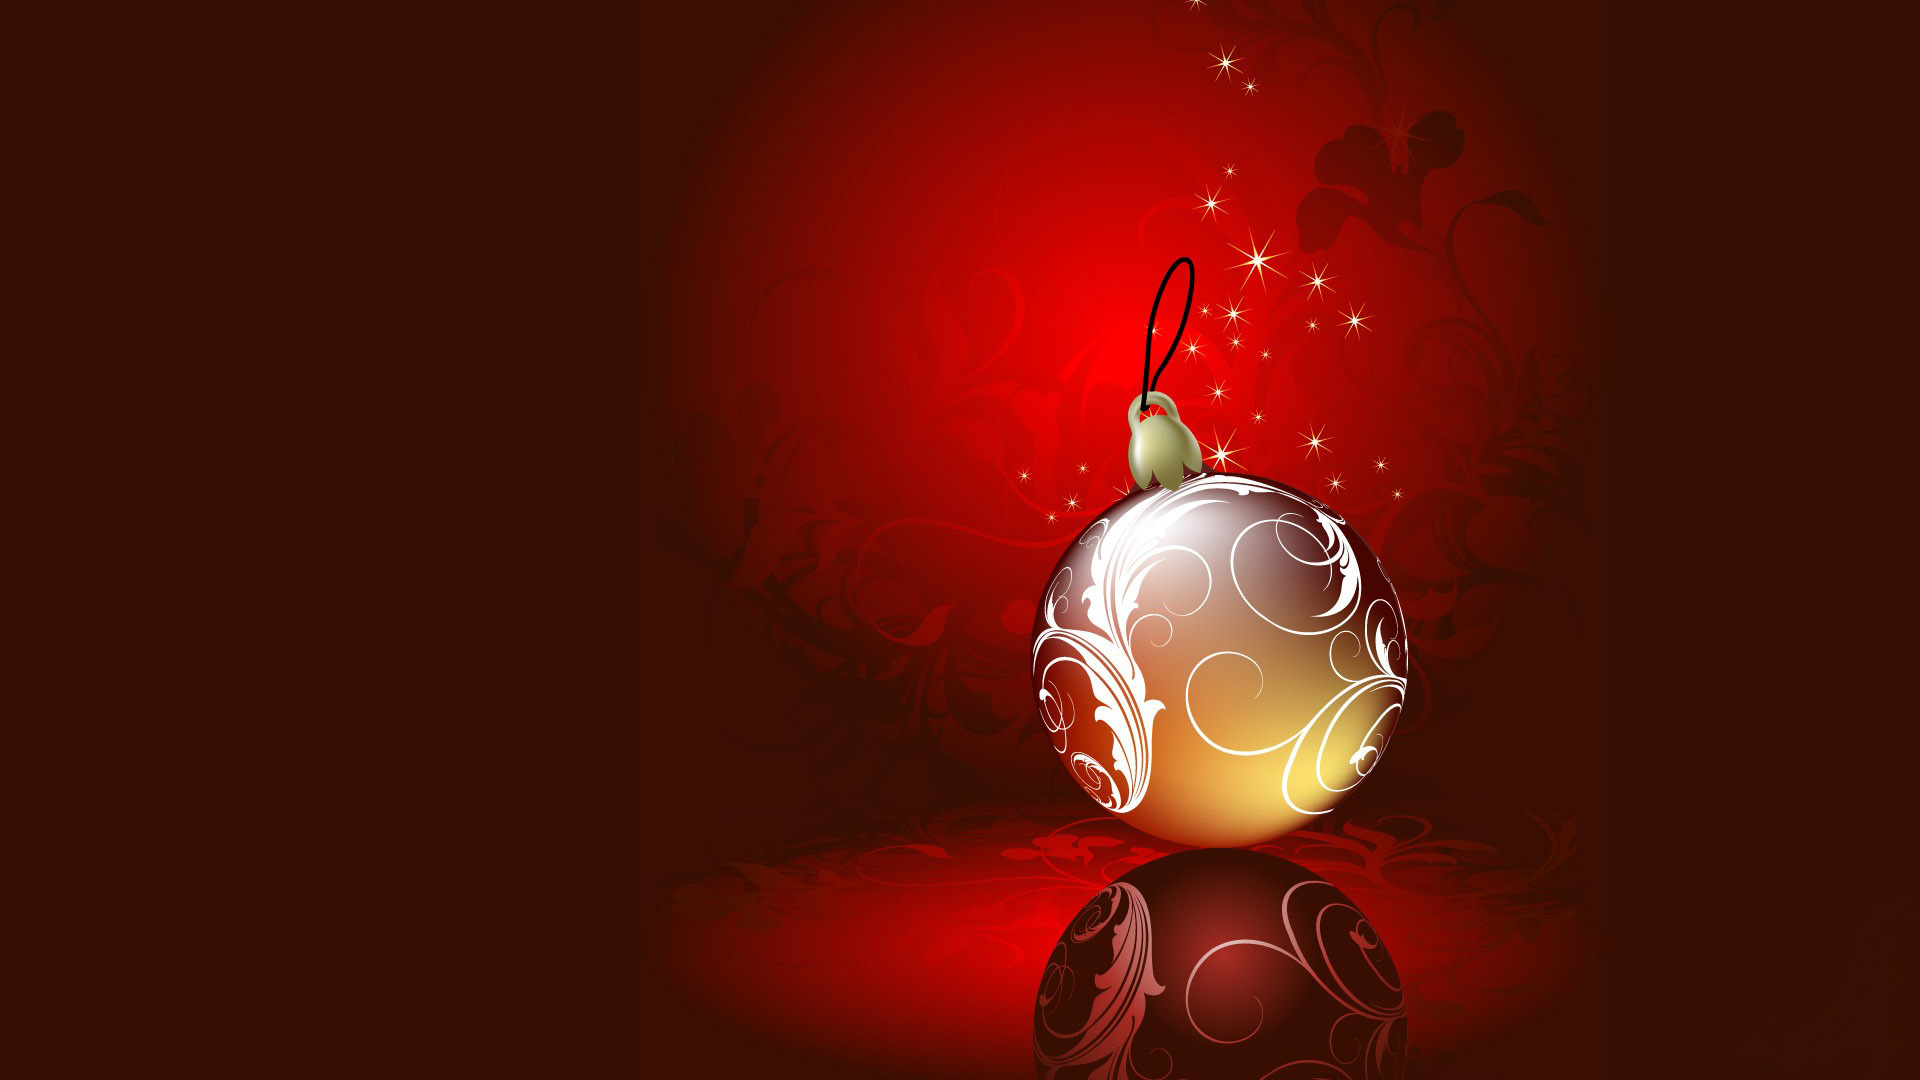 New Year Windows Background HD Wallpaper High Quality